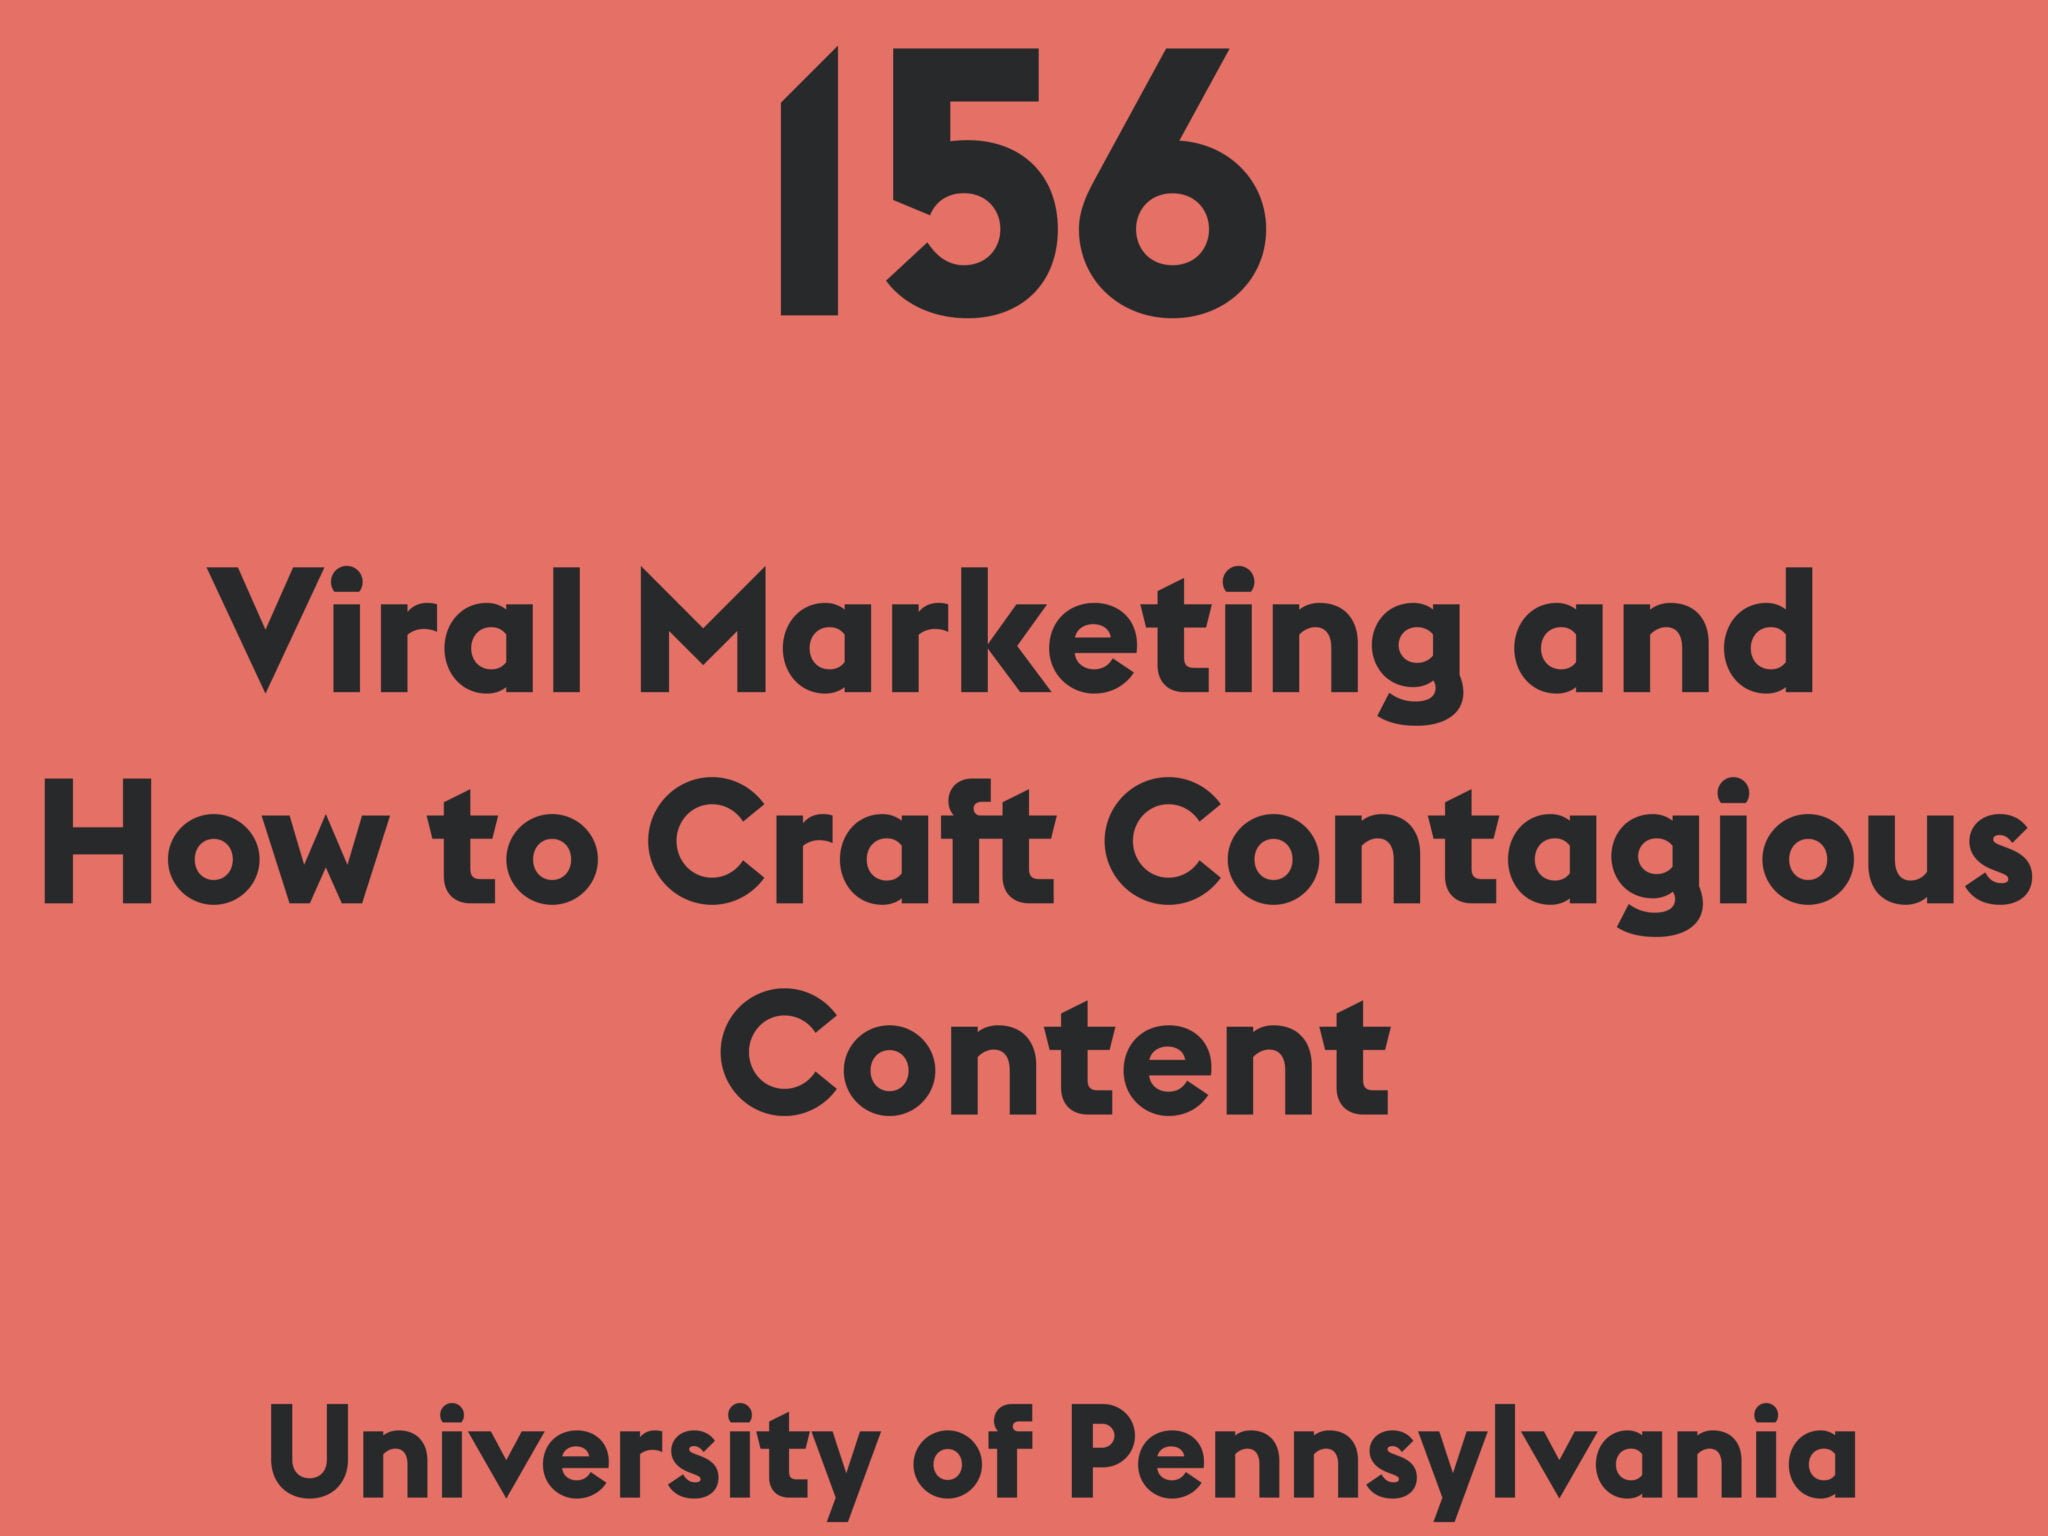 Viral Marketing and How to Craft Contagious Content